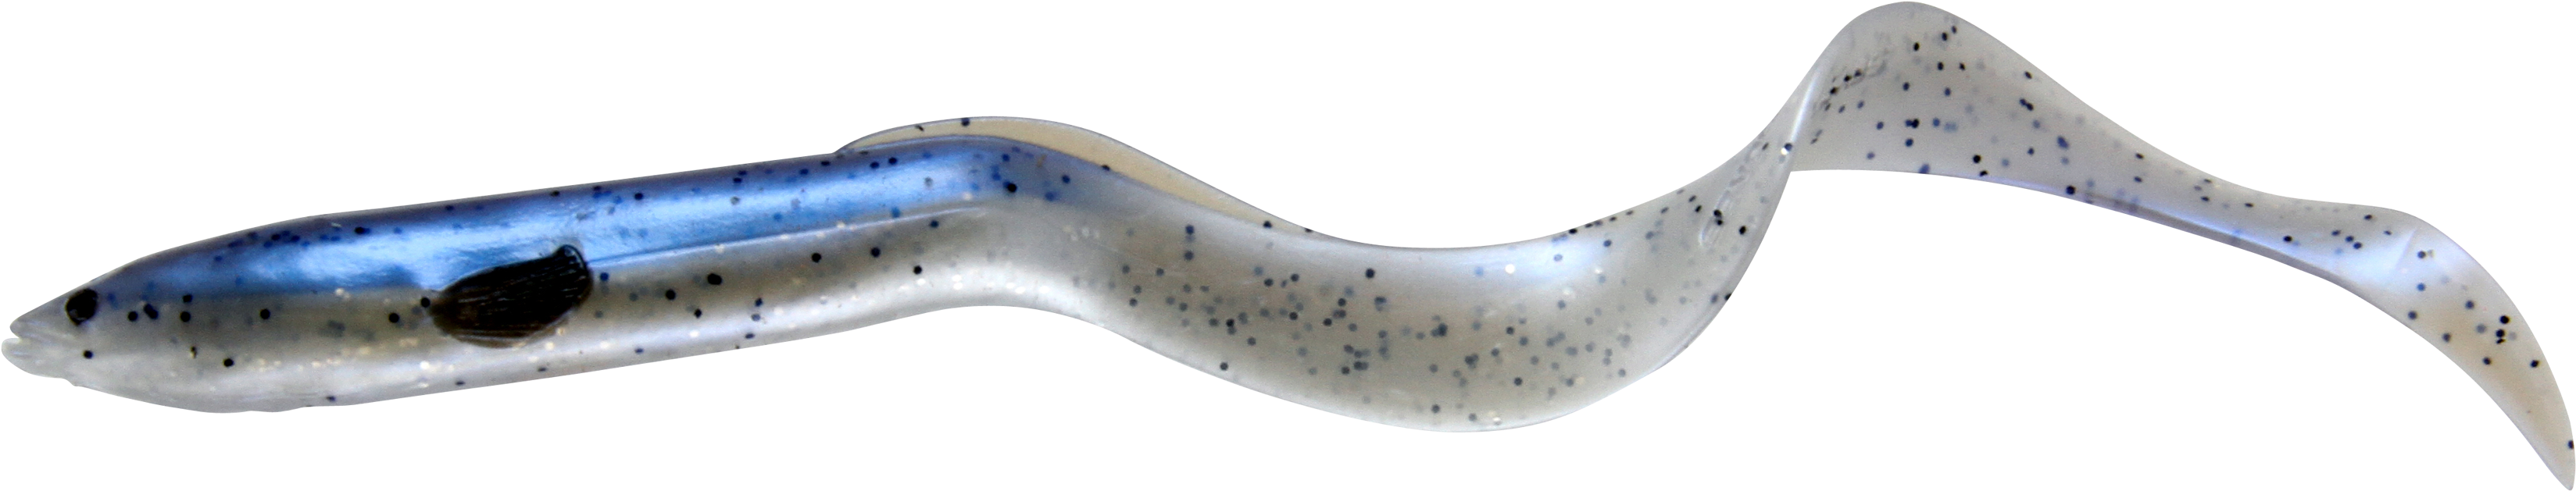 A Close-up Of A White And Blue Slime